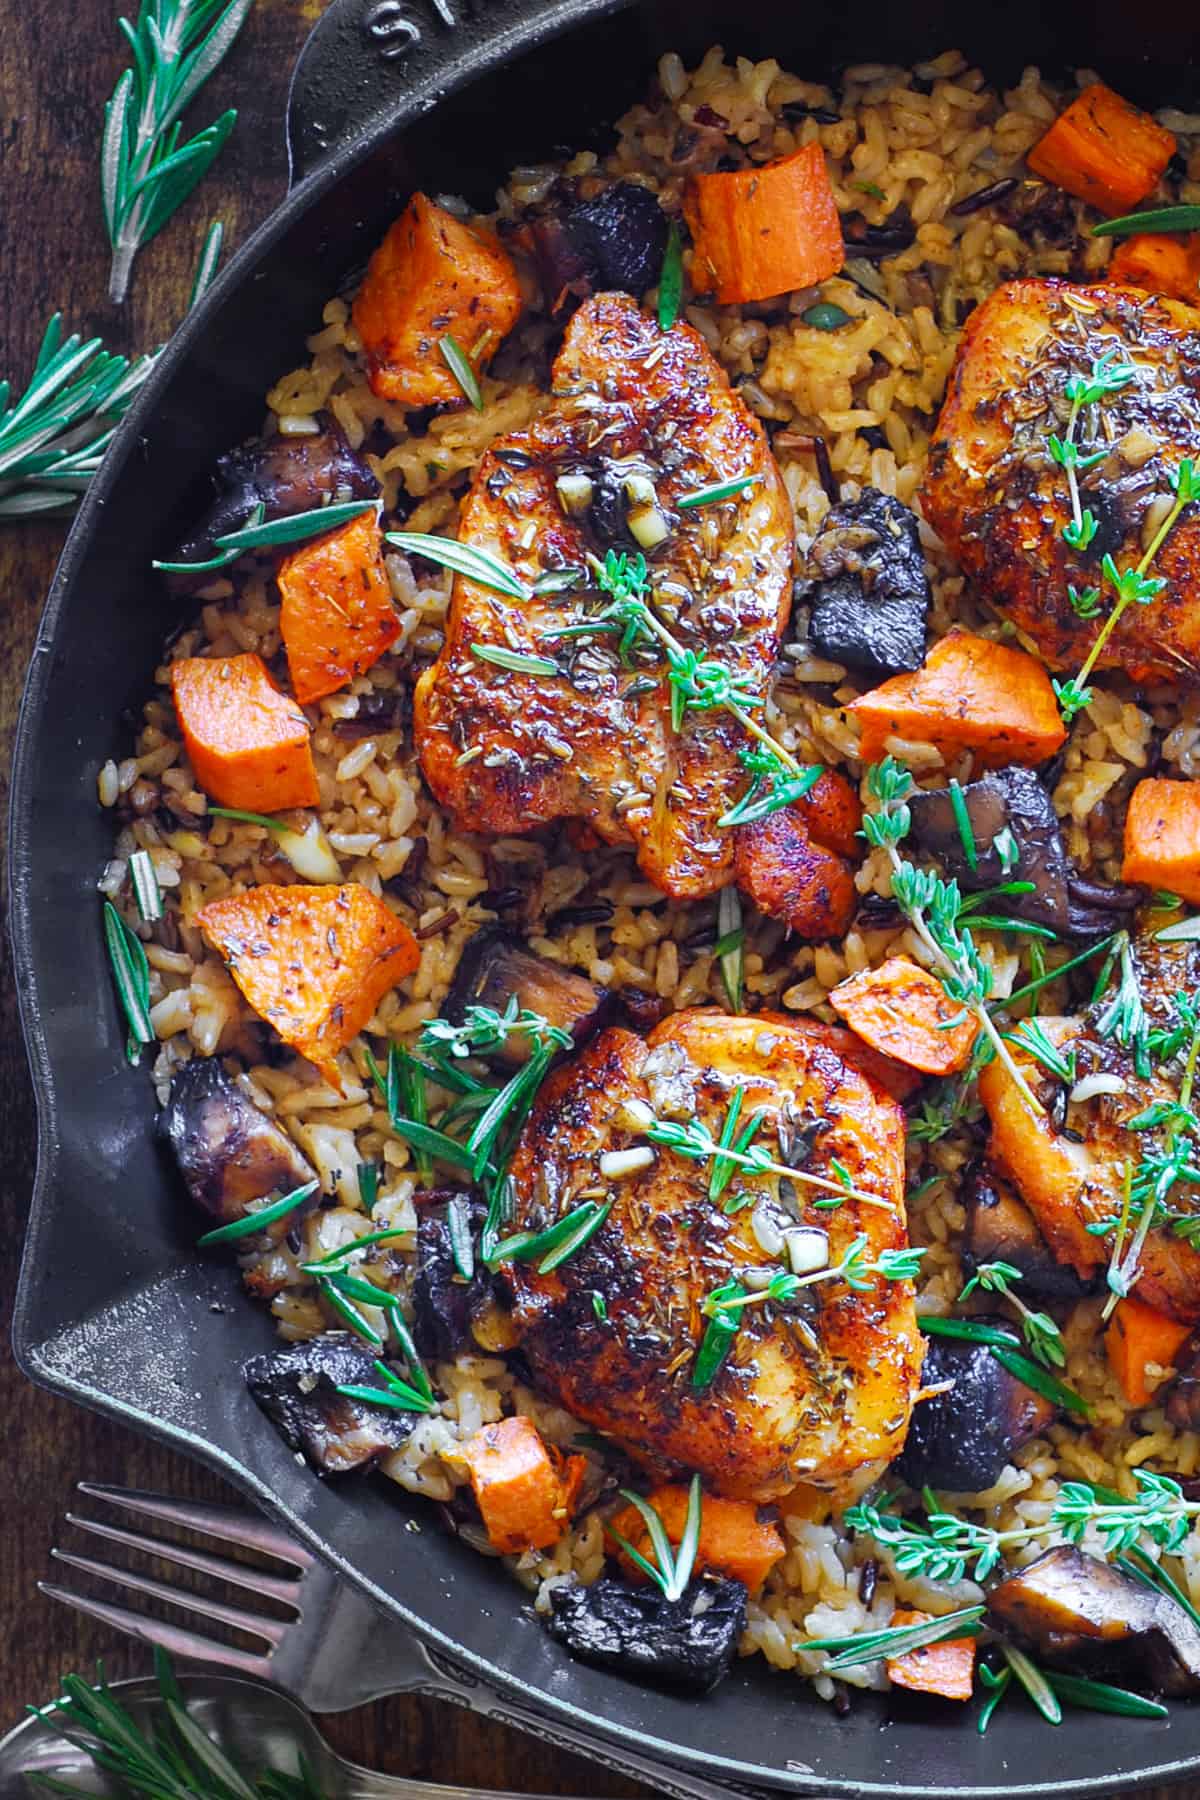 Chicken Wild Rice with Sweet Potatoes and Mushrooms in a cast iron skillet.